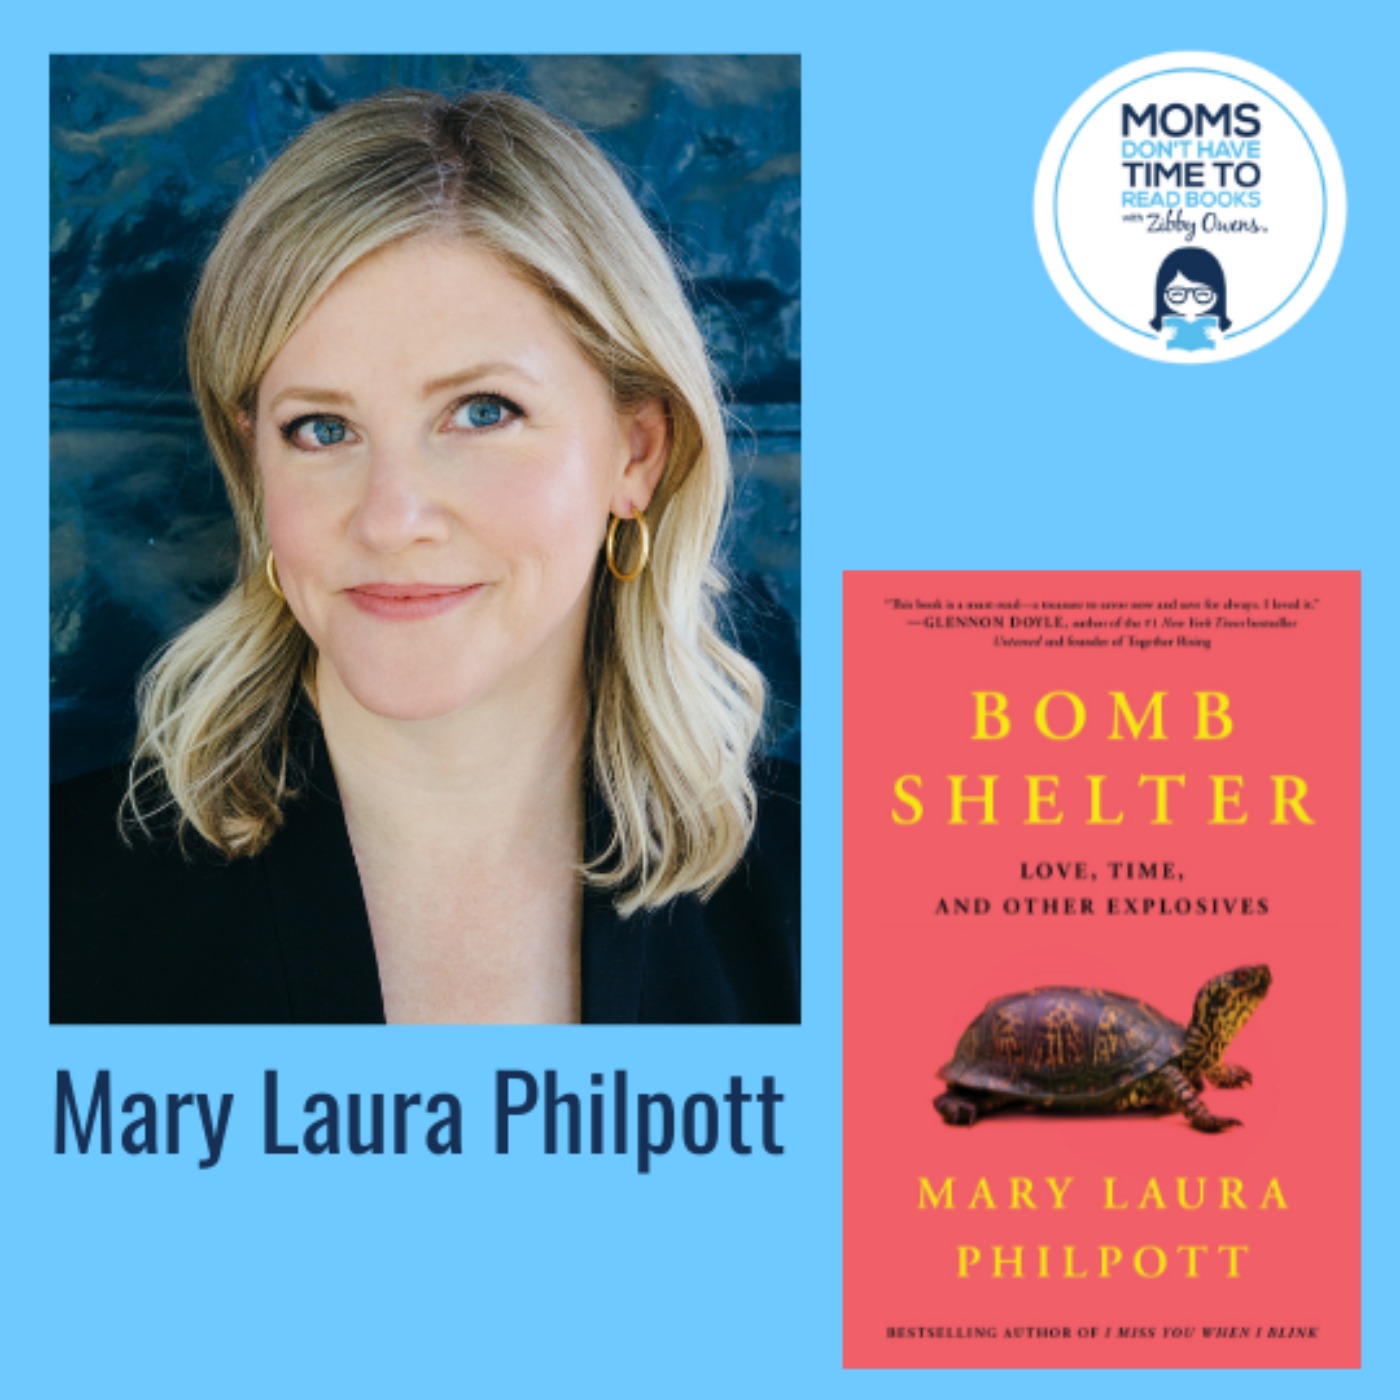 Mary Laura Philpott, BOMB SHELTER: Love, Time, and Other Explosives